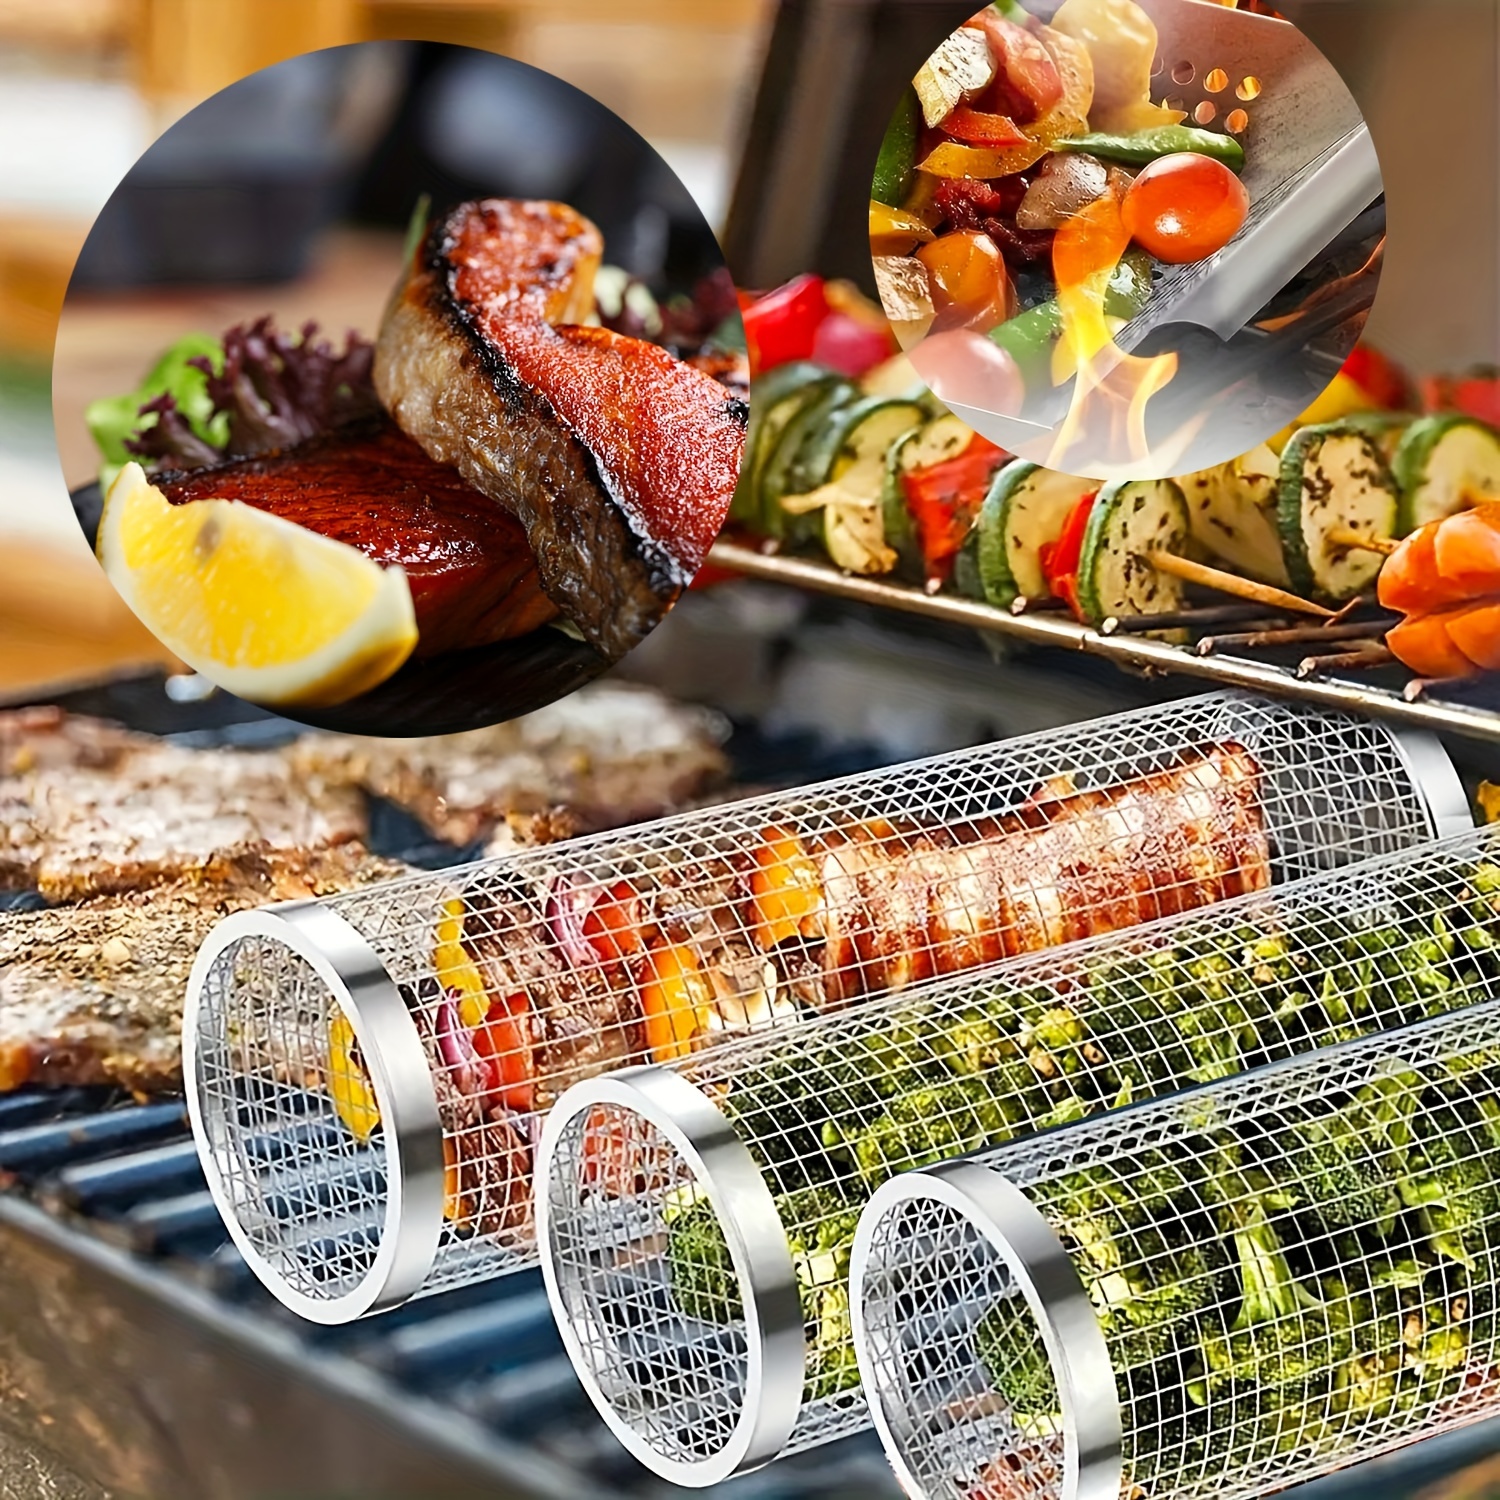  Outdoor Grilling Baskets Grill Bbq Equipment Tools